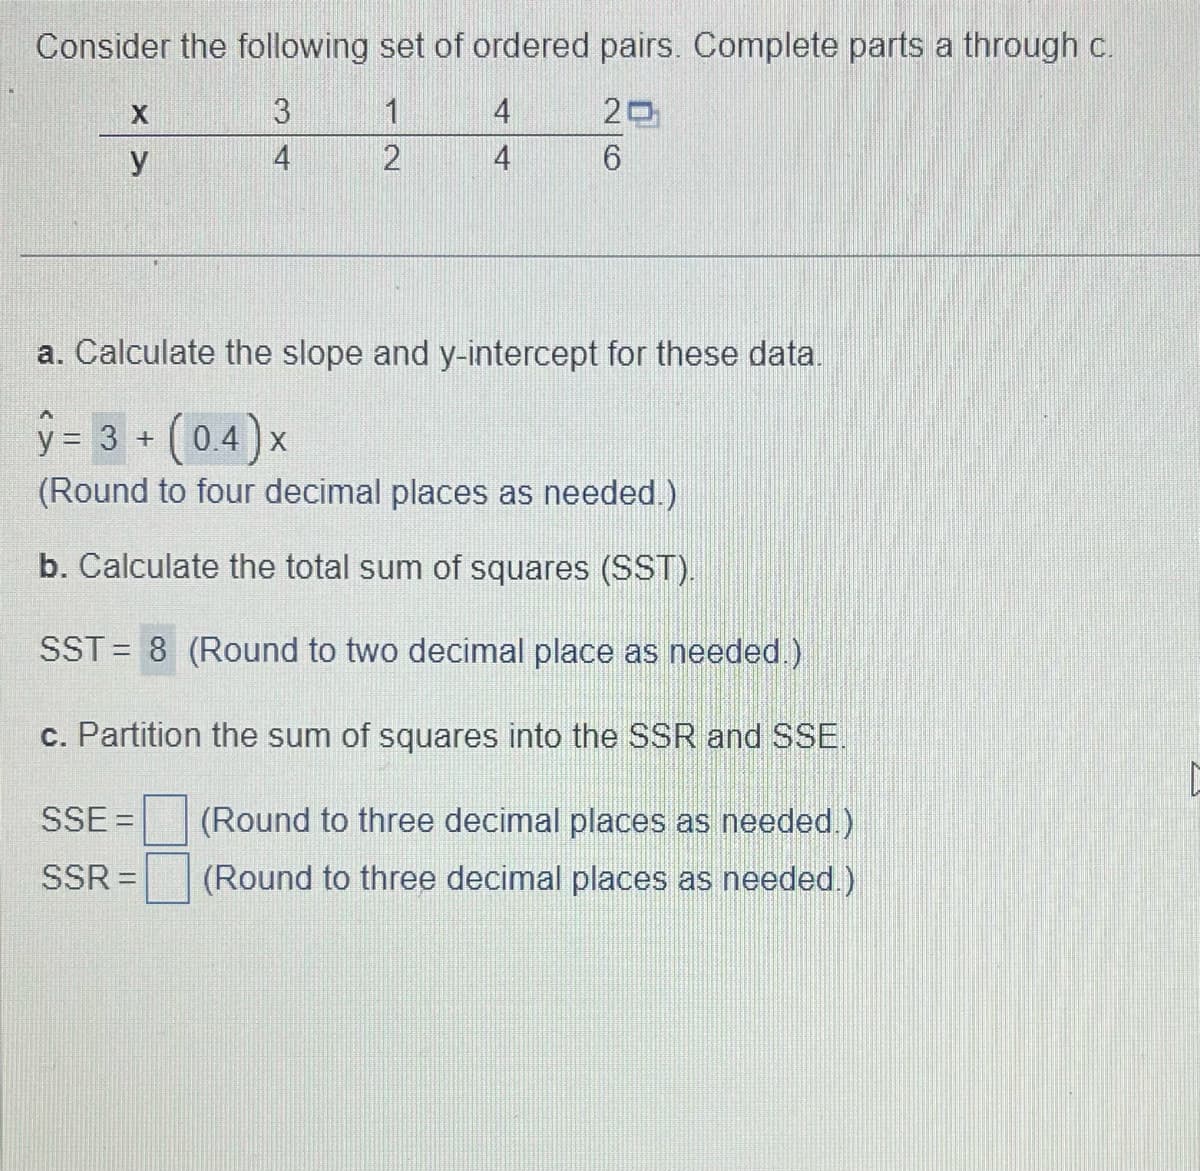 Consider the following set of ordered pairs. Complete parts a through c.
3
20
4
6
X
y
2
SSE =
SSR =
4
4
a. Calculate the slope and y-intercept for these data.
y = 3 + (0.4) x
(Round to four decimal places as needed.)
b. Calculate the total sum of squares (SST).
SST = 8 (Round to two decimal place as needed.)
c. Partition the sum of squares into the SSR and SSE.
(Round to three decimal places as needed.)
(Round to three decimal places as needed.)